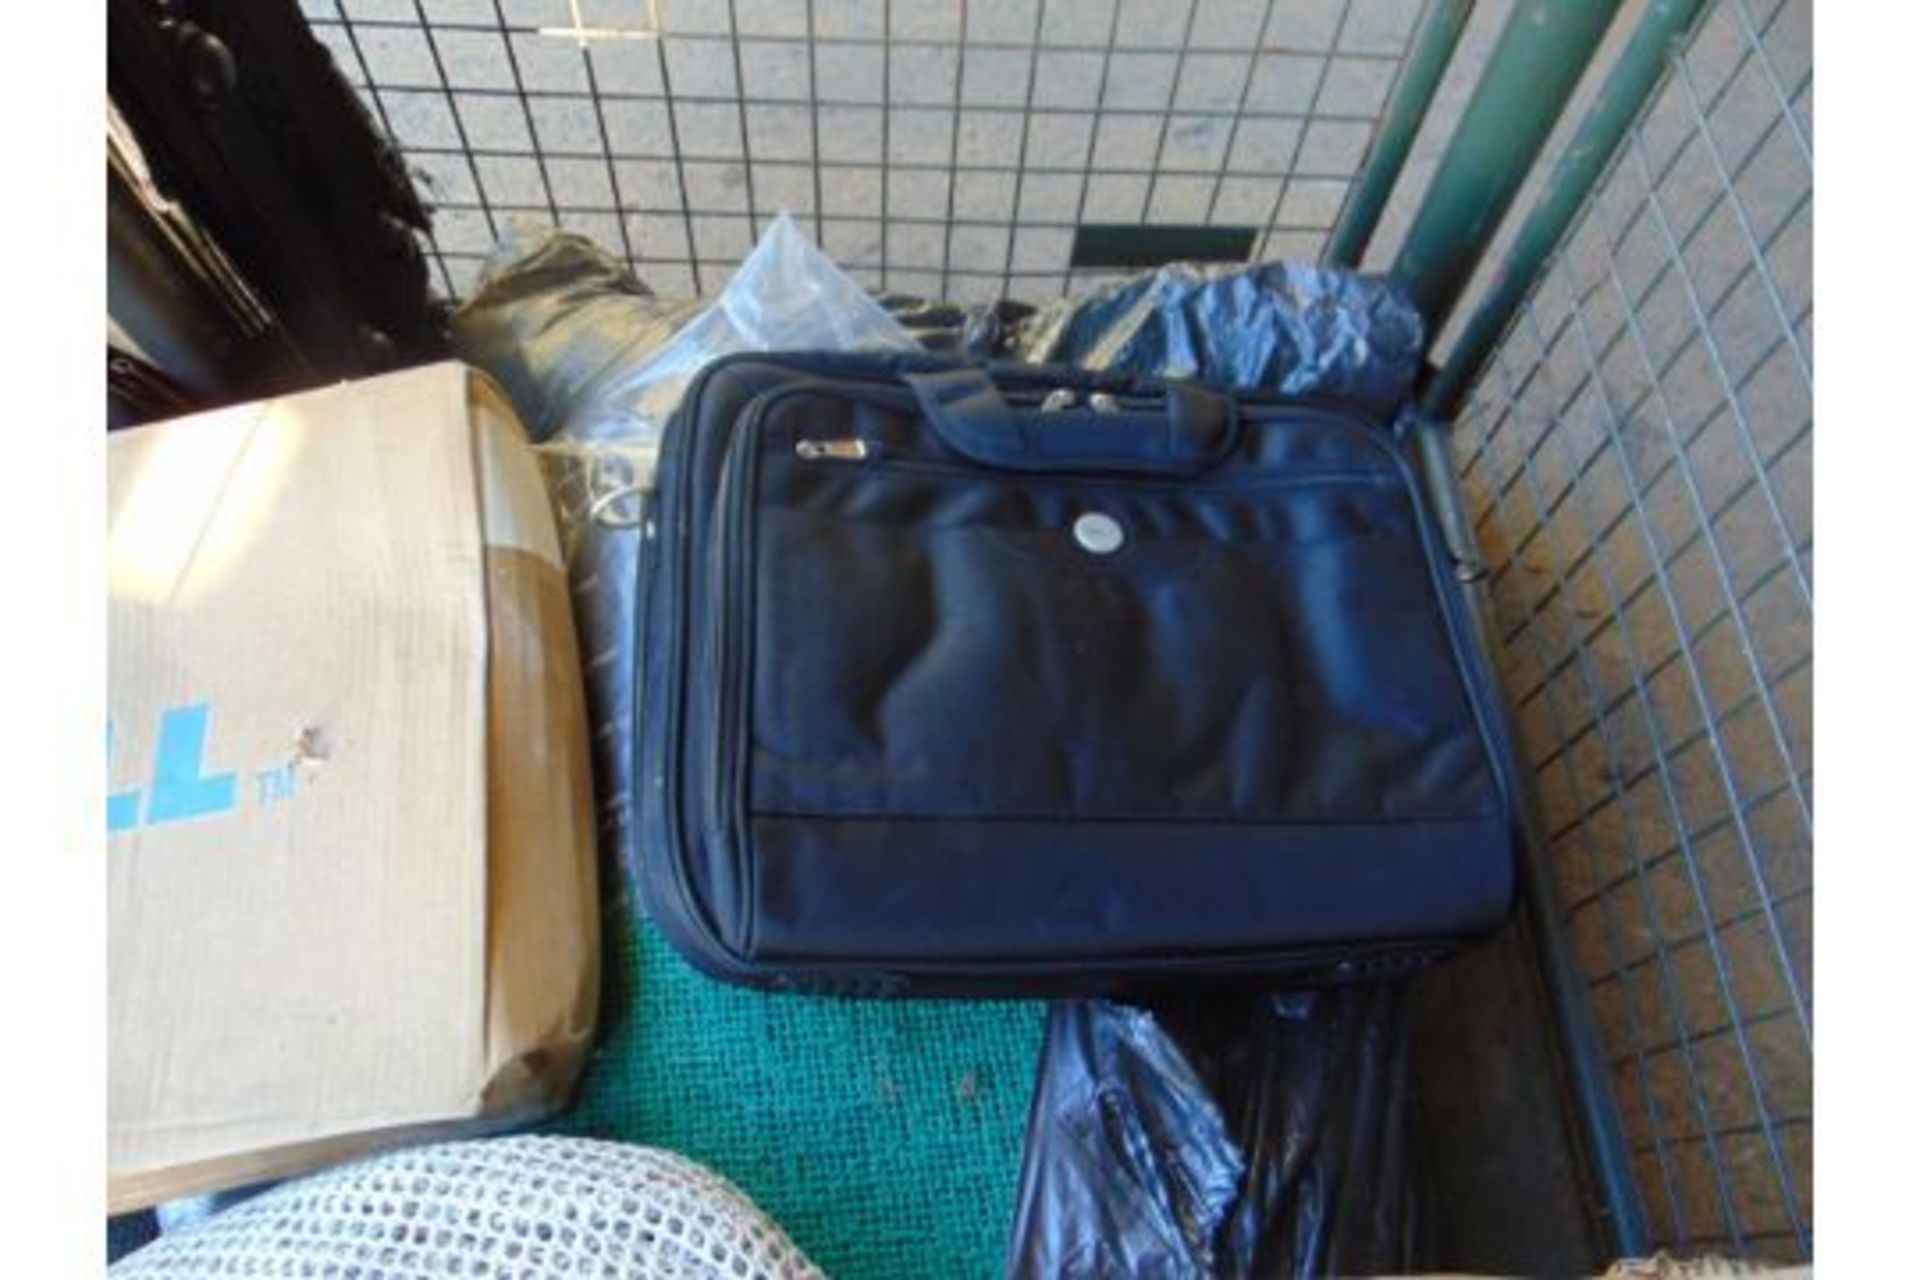 1 x Stillage New Unused DELL Laptop Bags, Canvas Sheets, Carry on Bag etc - Image 3 of 6